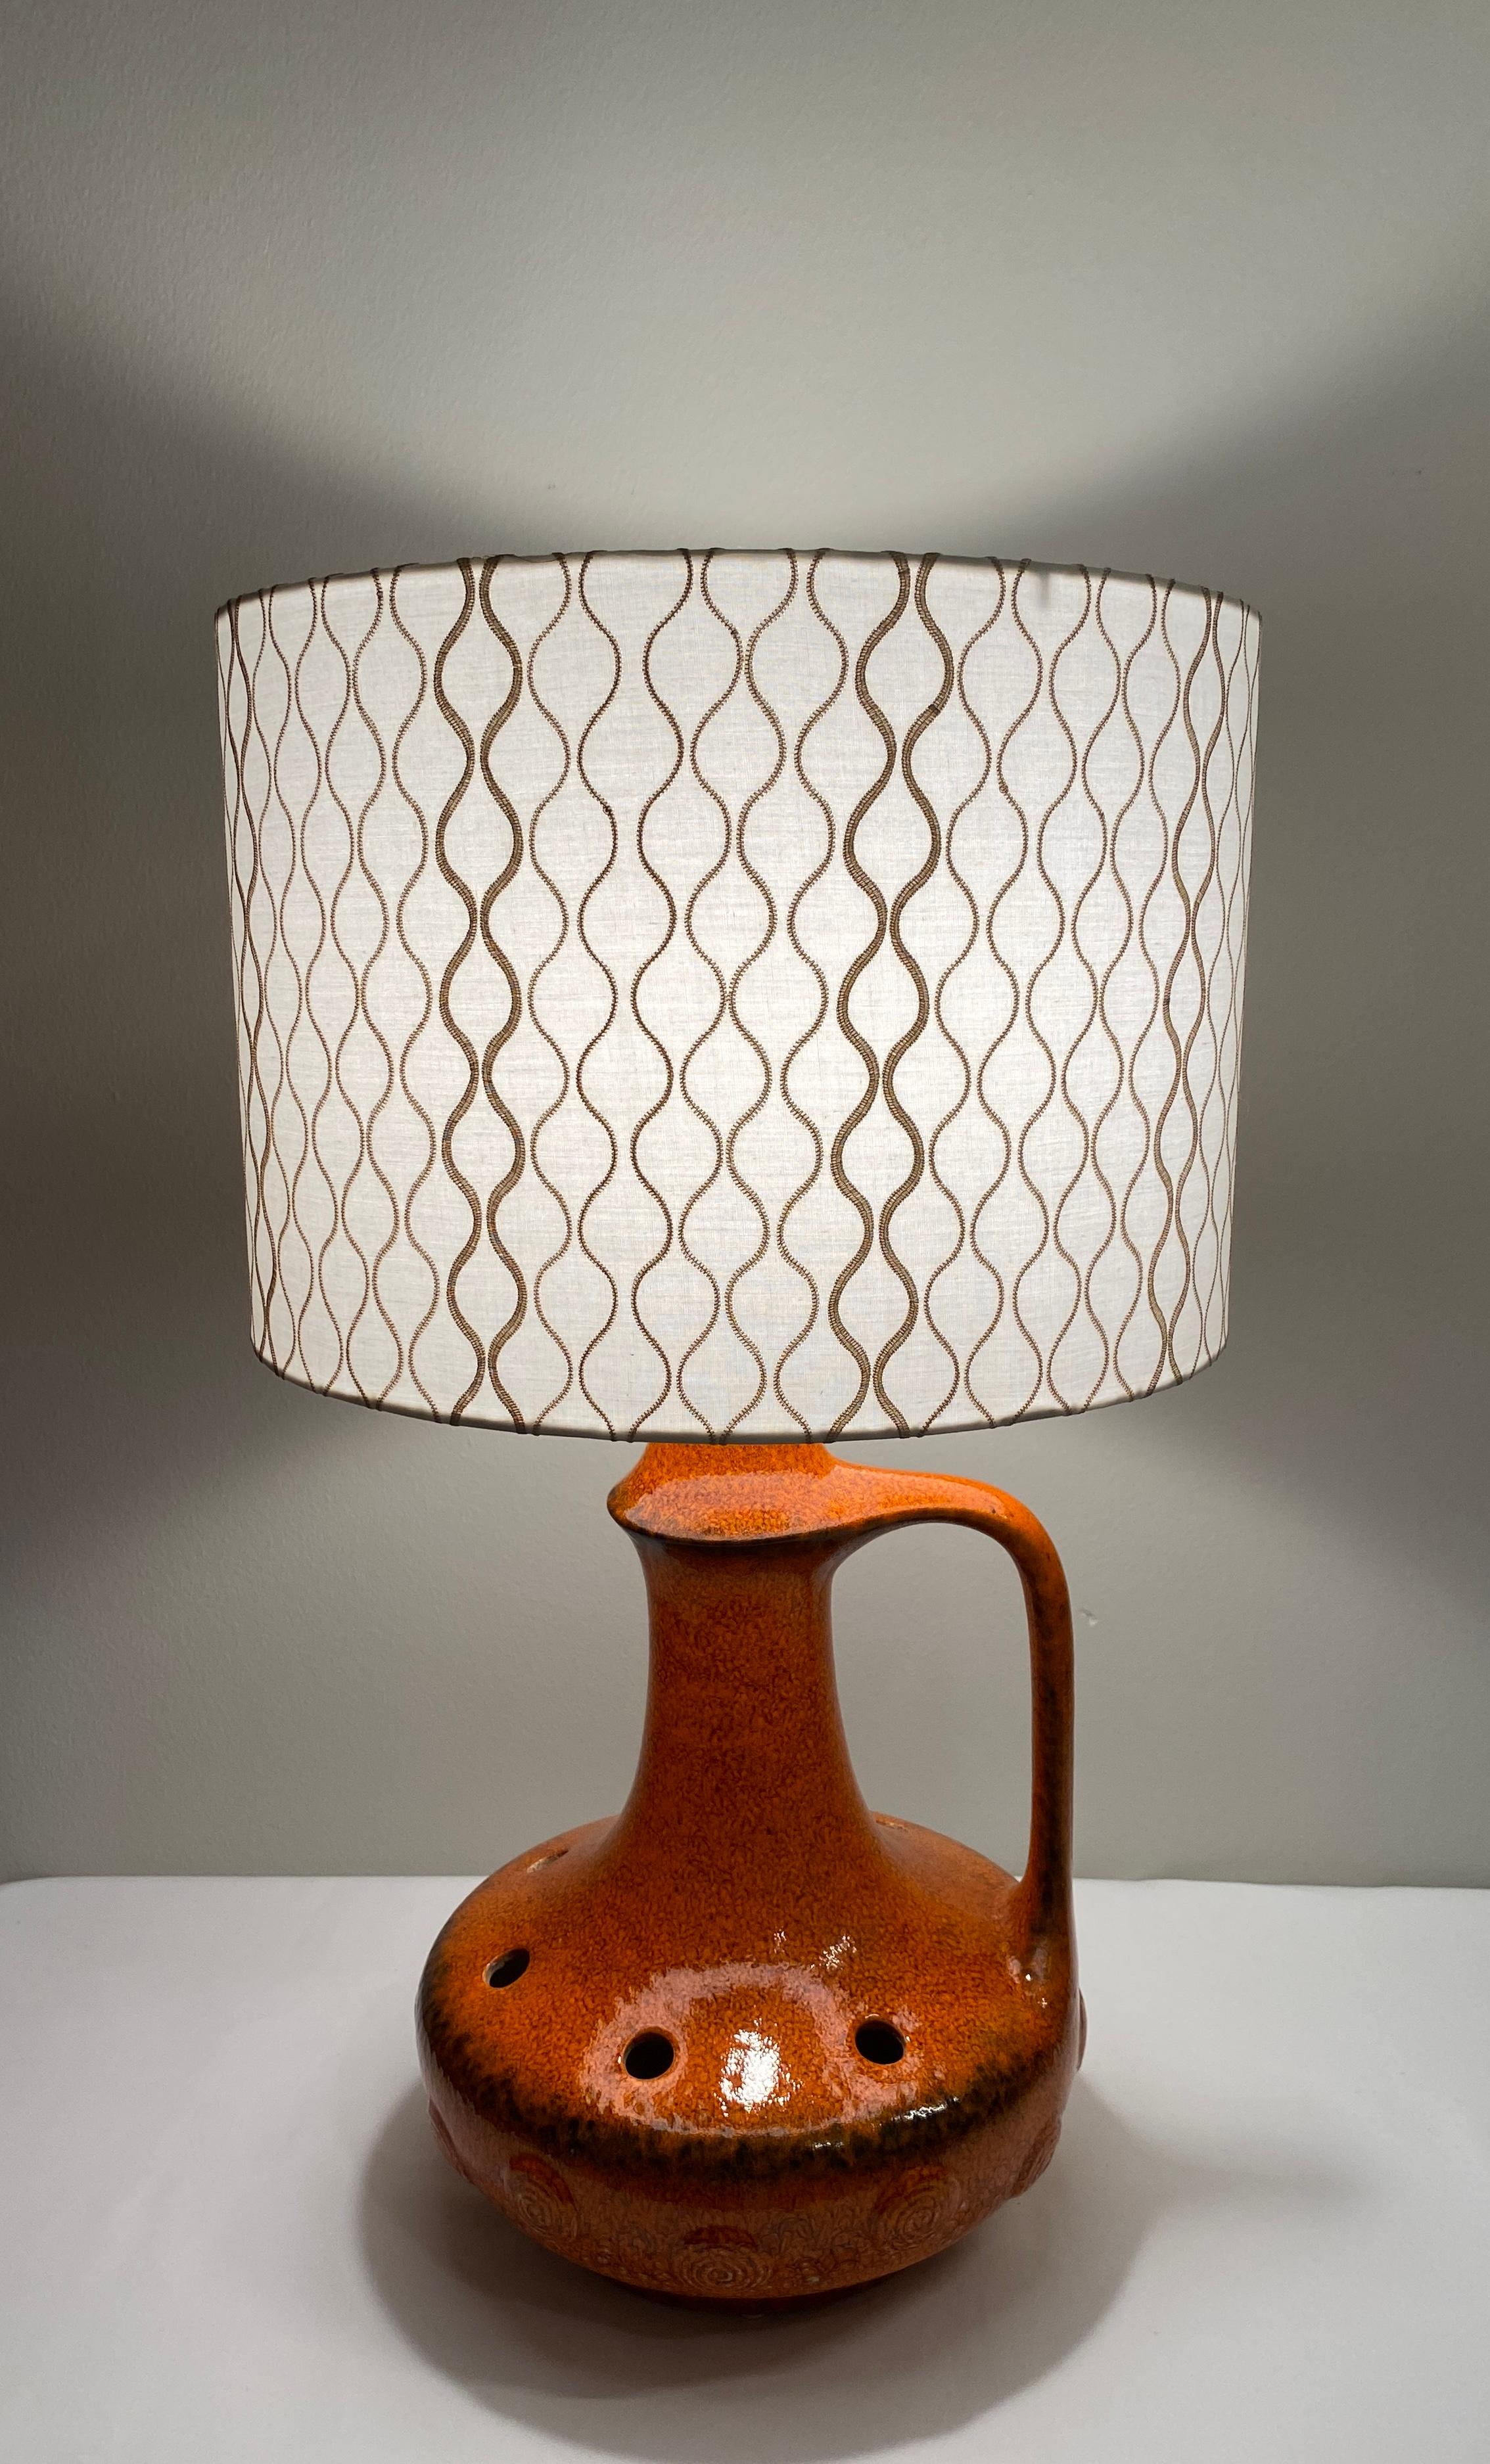 A large and very decorative French mid-century ceramic table lamp in a stunning glazed burnt orange with complimentary light brown hues. Hand-crafted ceramic piece that originates from Vallauris, France. Made in the manner of Georges Pelletier